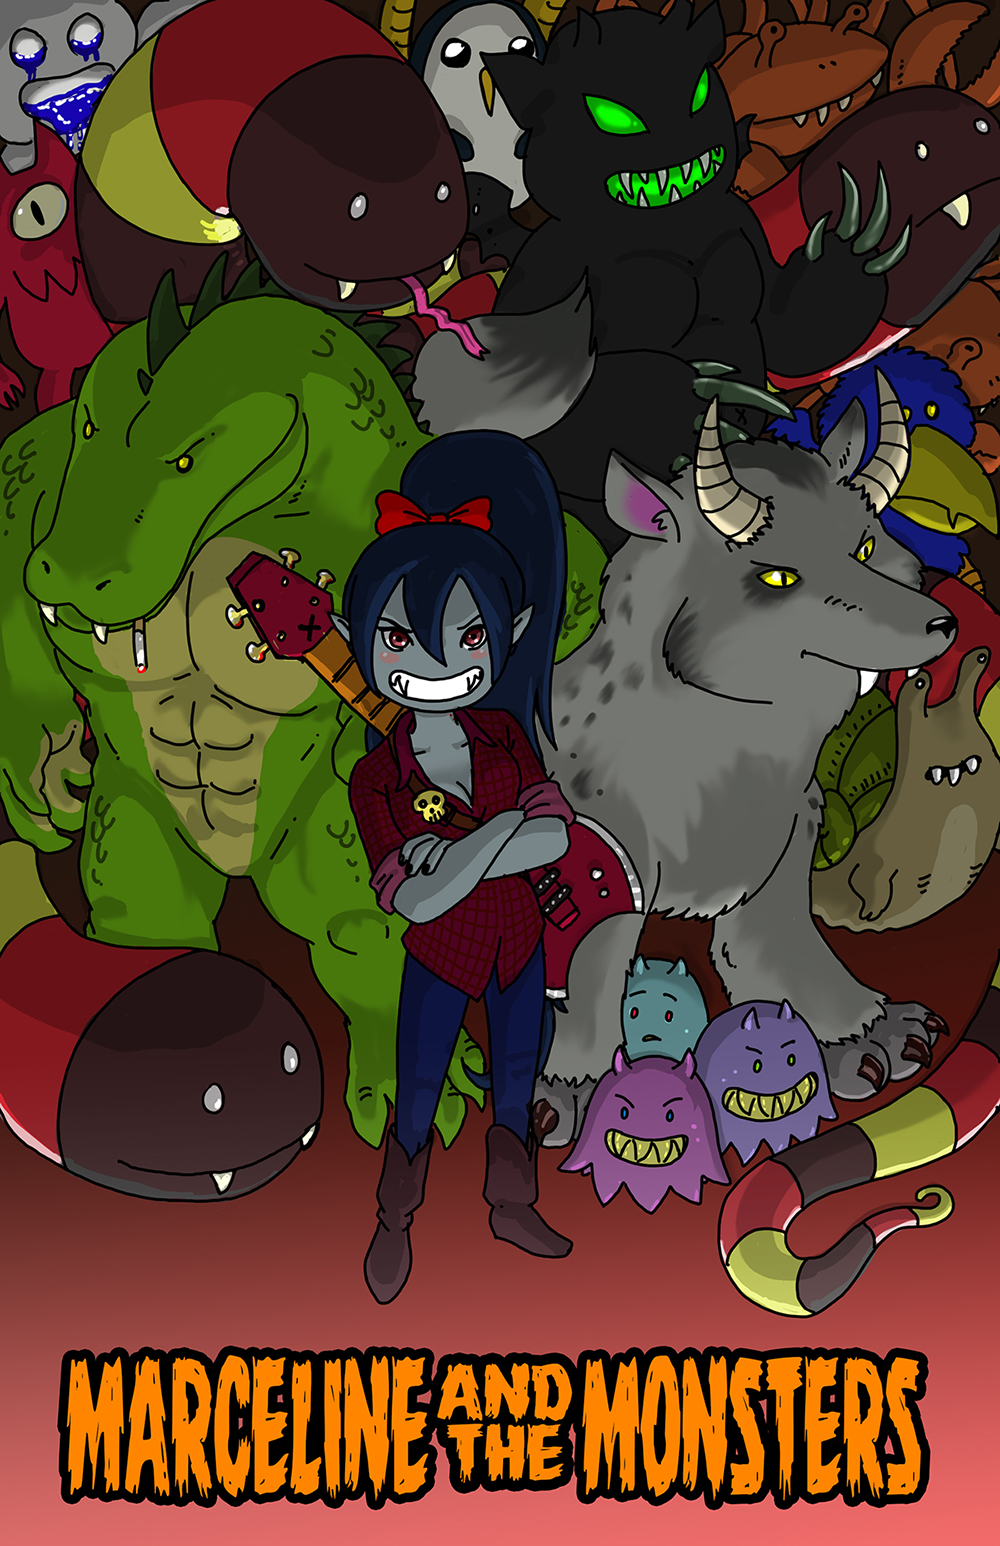 Marceline and the Monsters